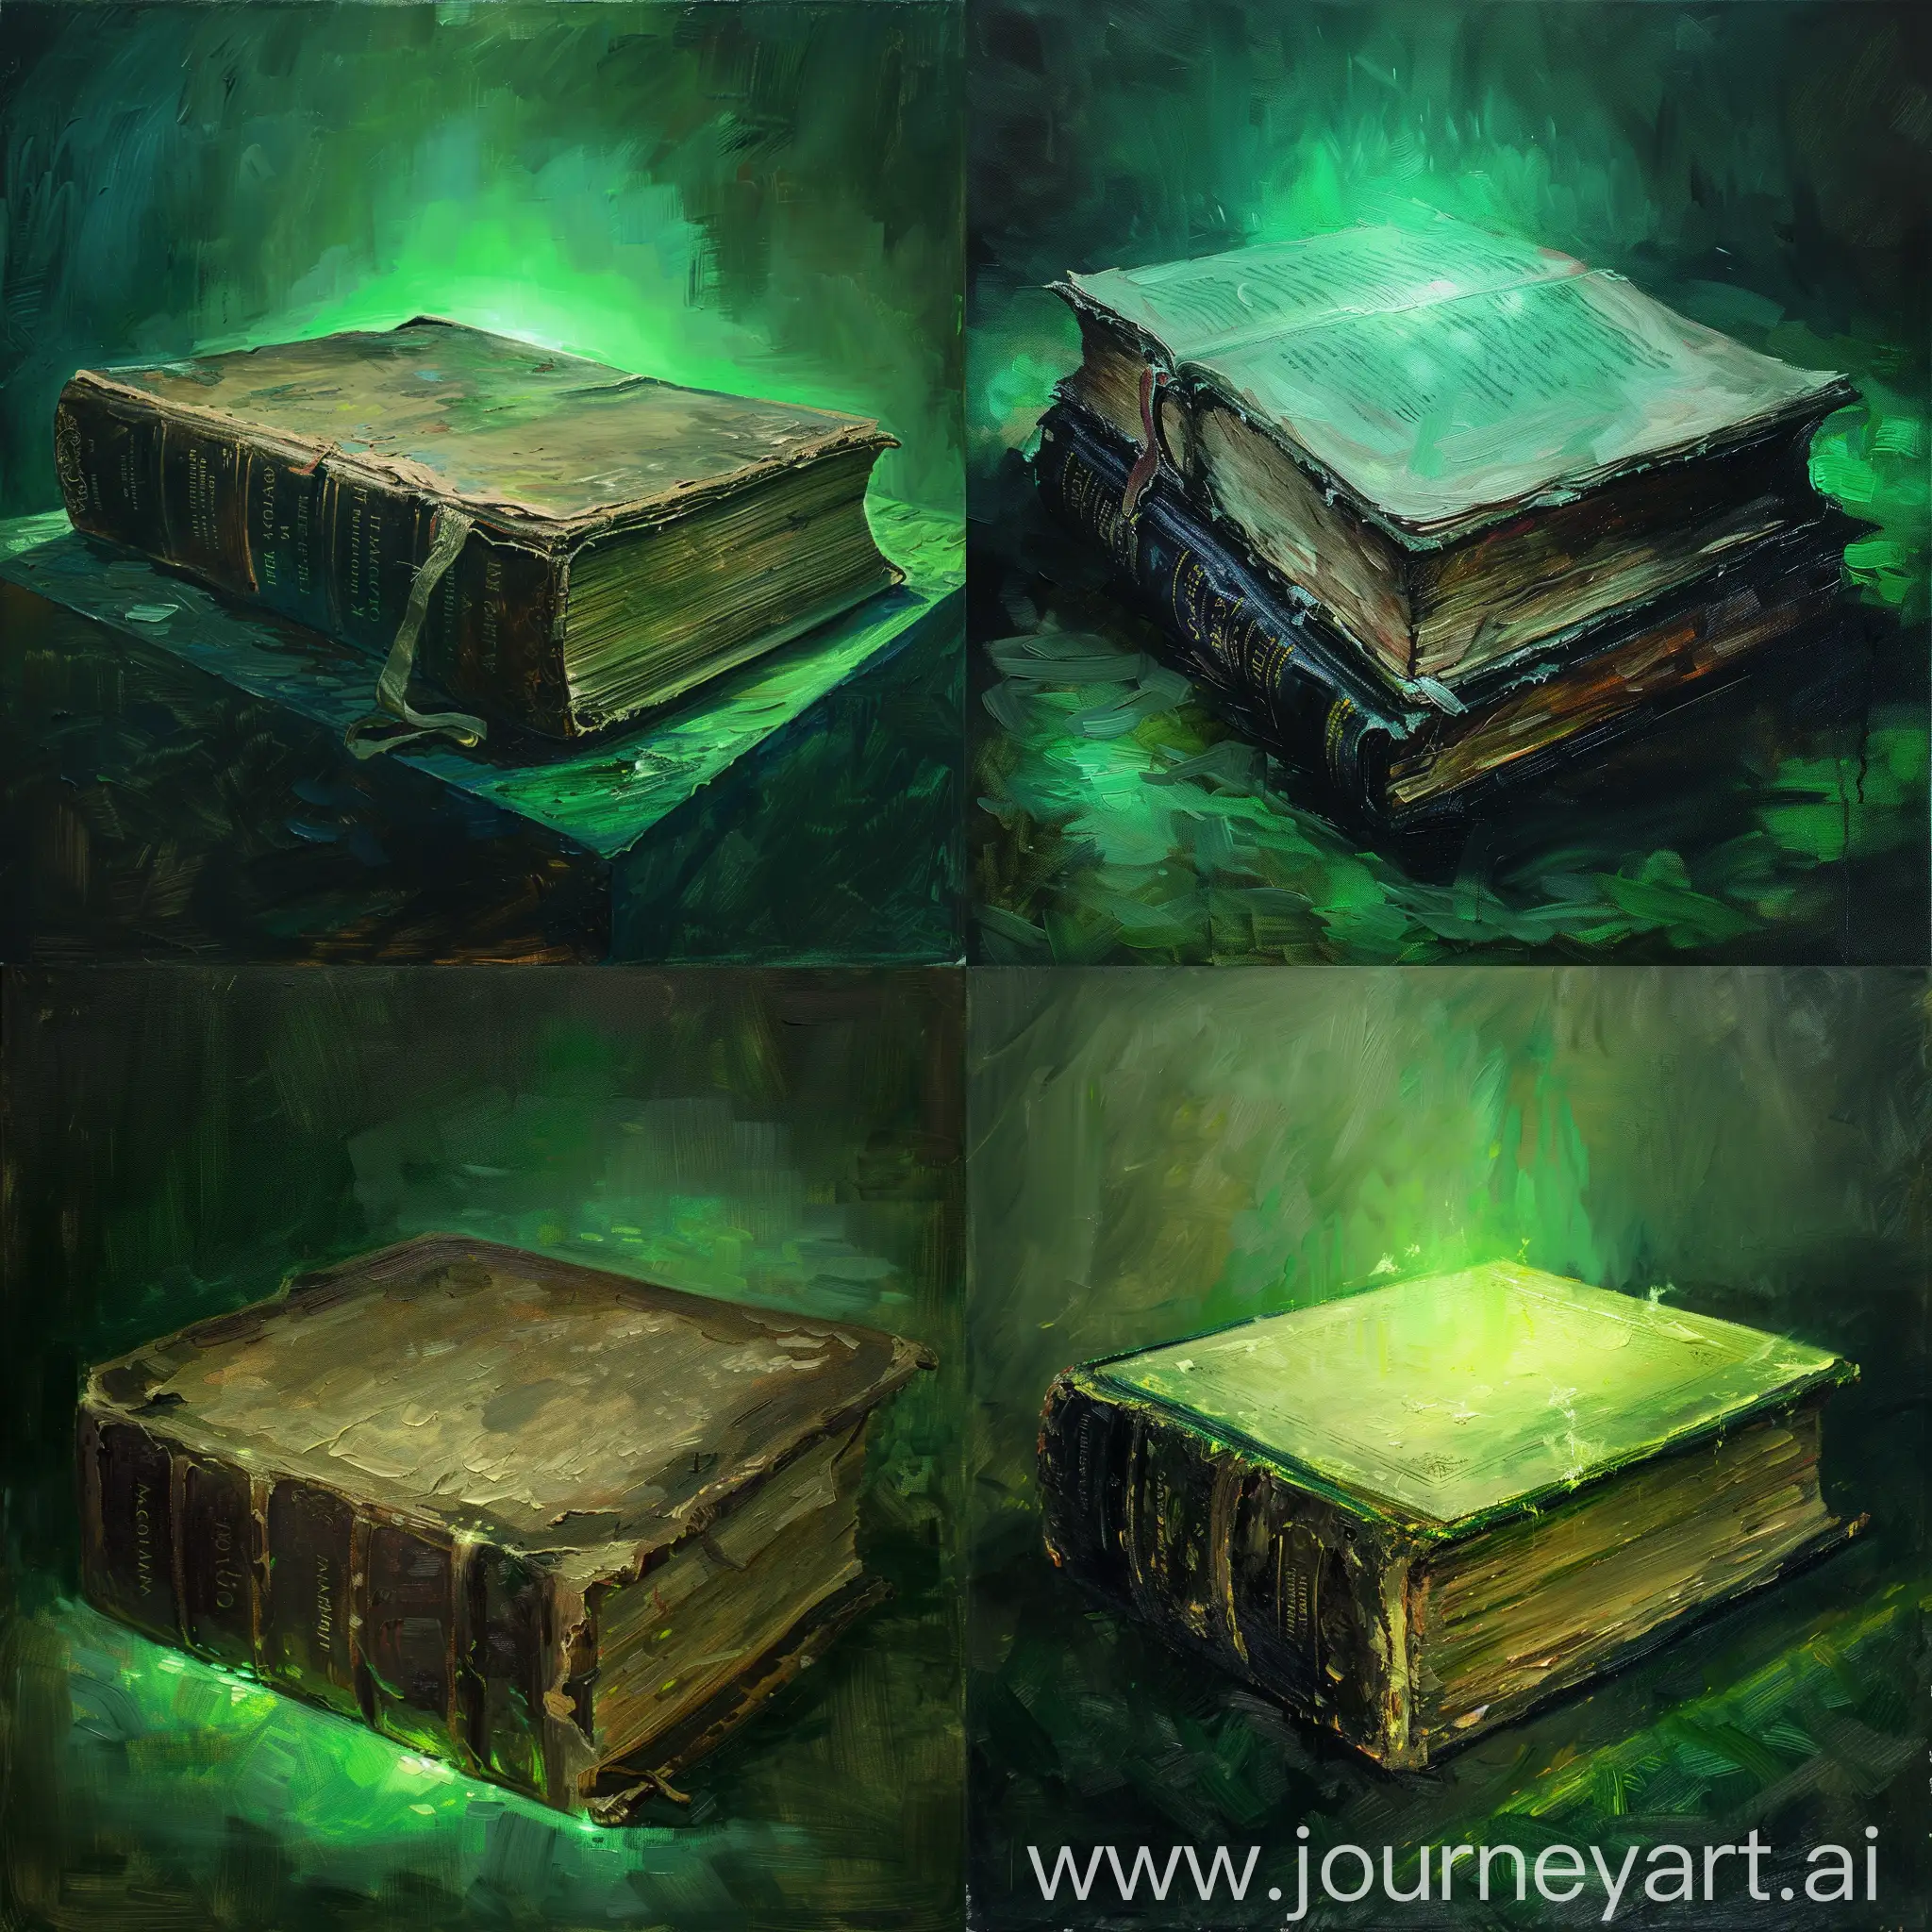 an oil painting of an old book illuminated by green light, muted colors, album cover